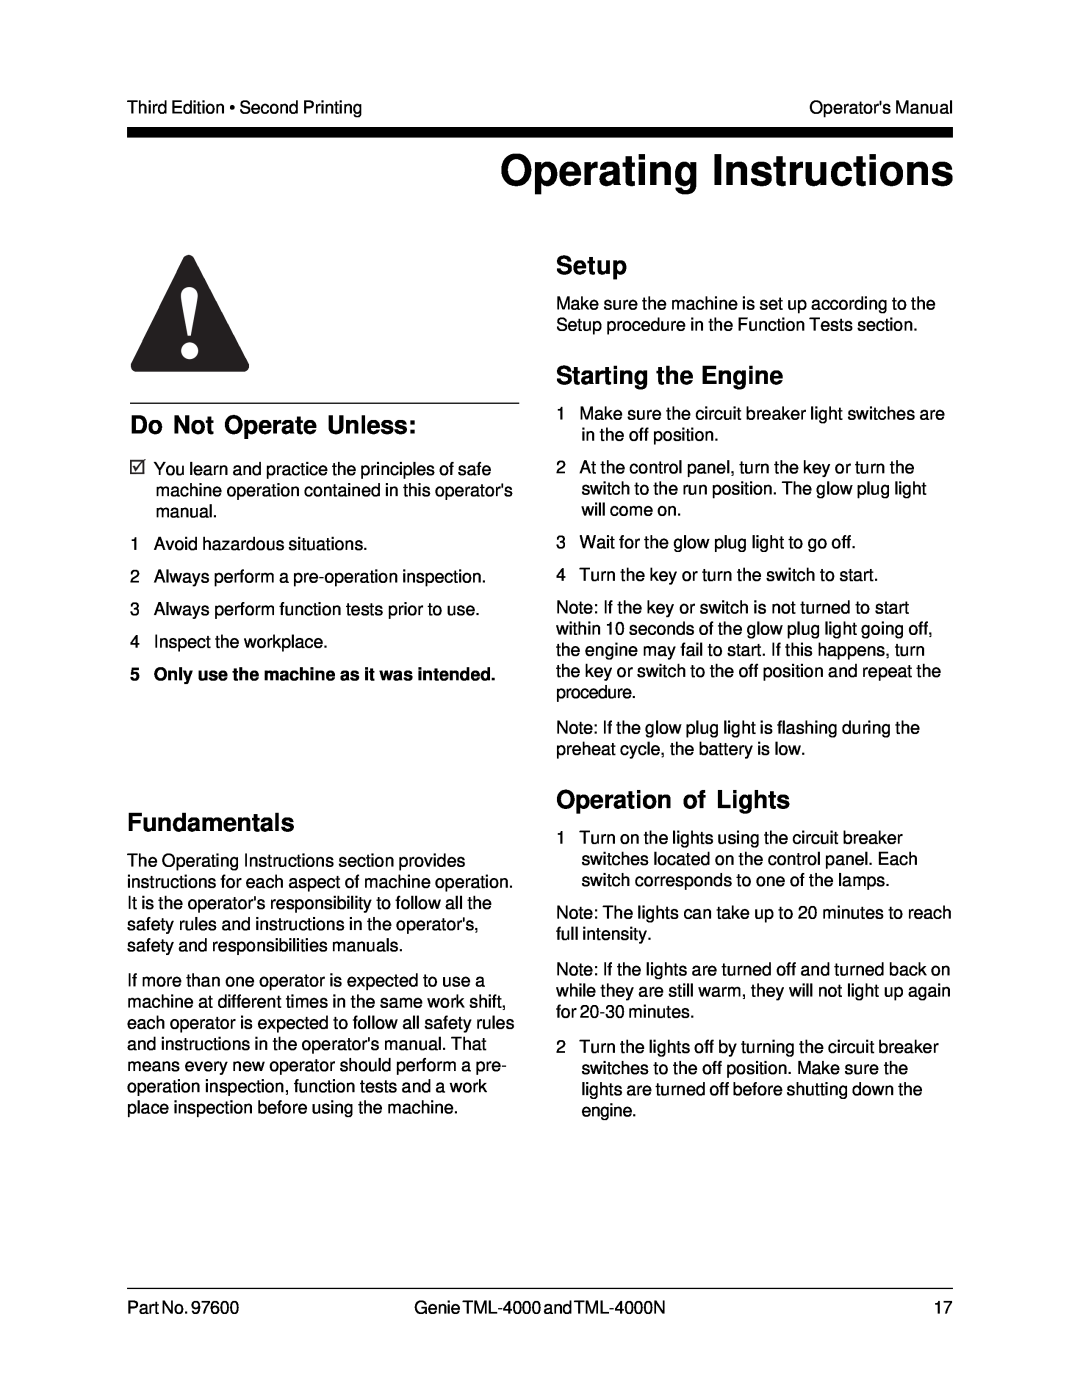 Genie TML-4000N Operating Instructions, Starting the Engine, Operation of Lights, Only use the machine as it was intended 